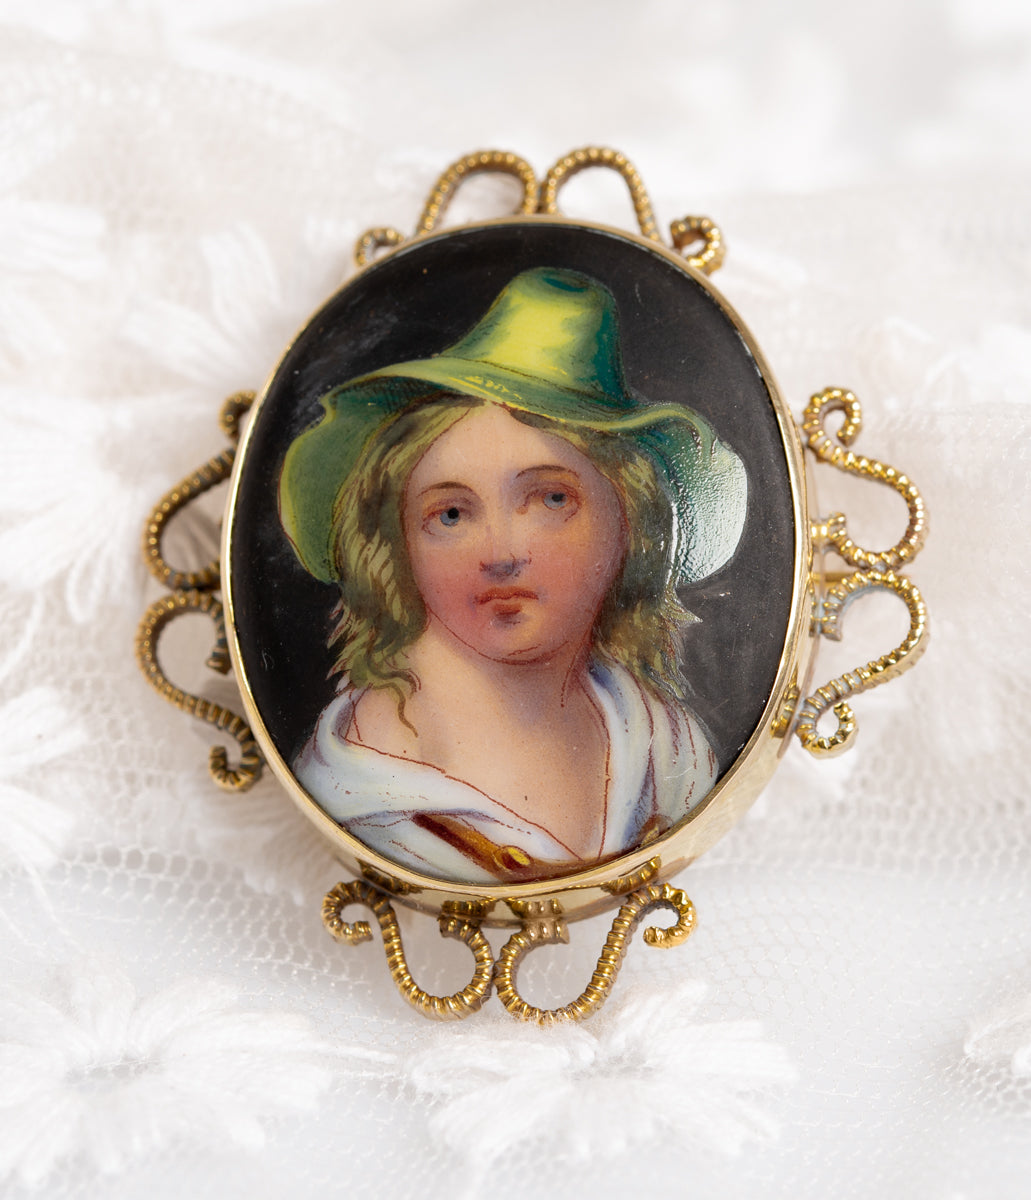 Antique Victorian/Edwardian 9ct 9K Gold & Hand Painted Porcelain Portrait of a Gypsy Girl Brooch/Pin (A1324)